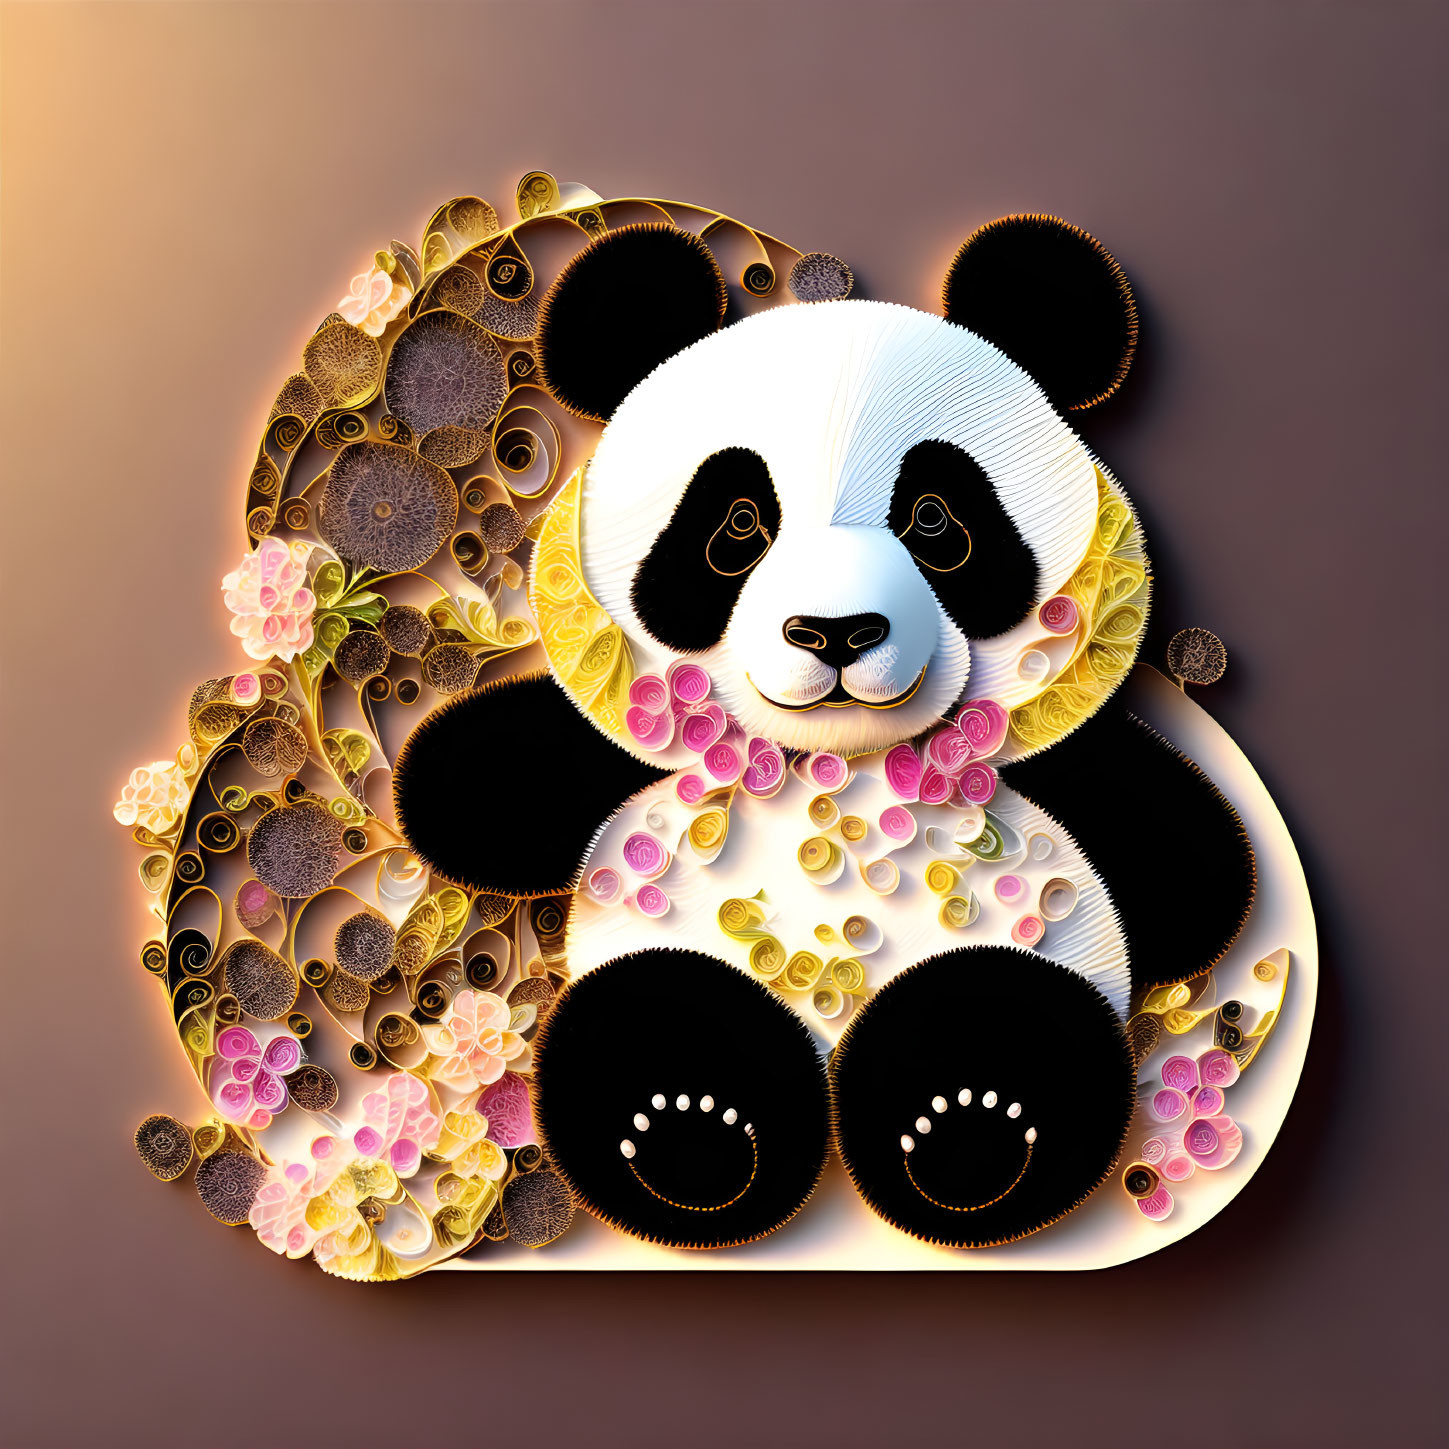 Stylized panda with floral patterns in 3D effect on warm background